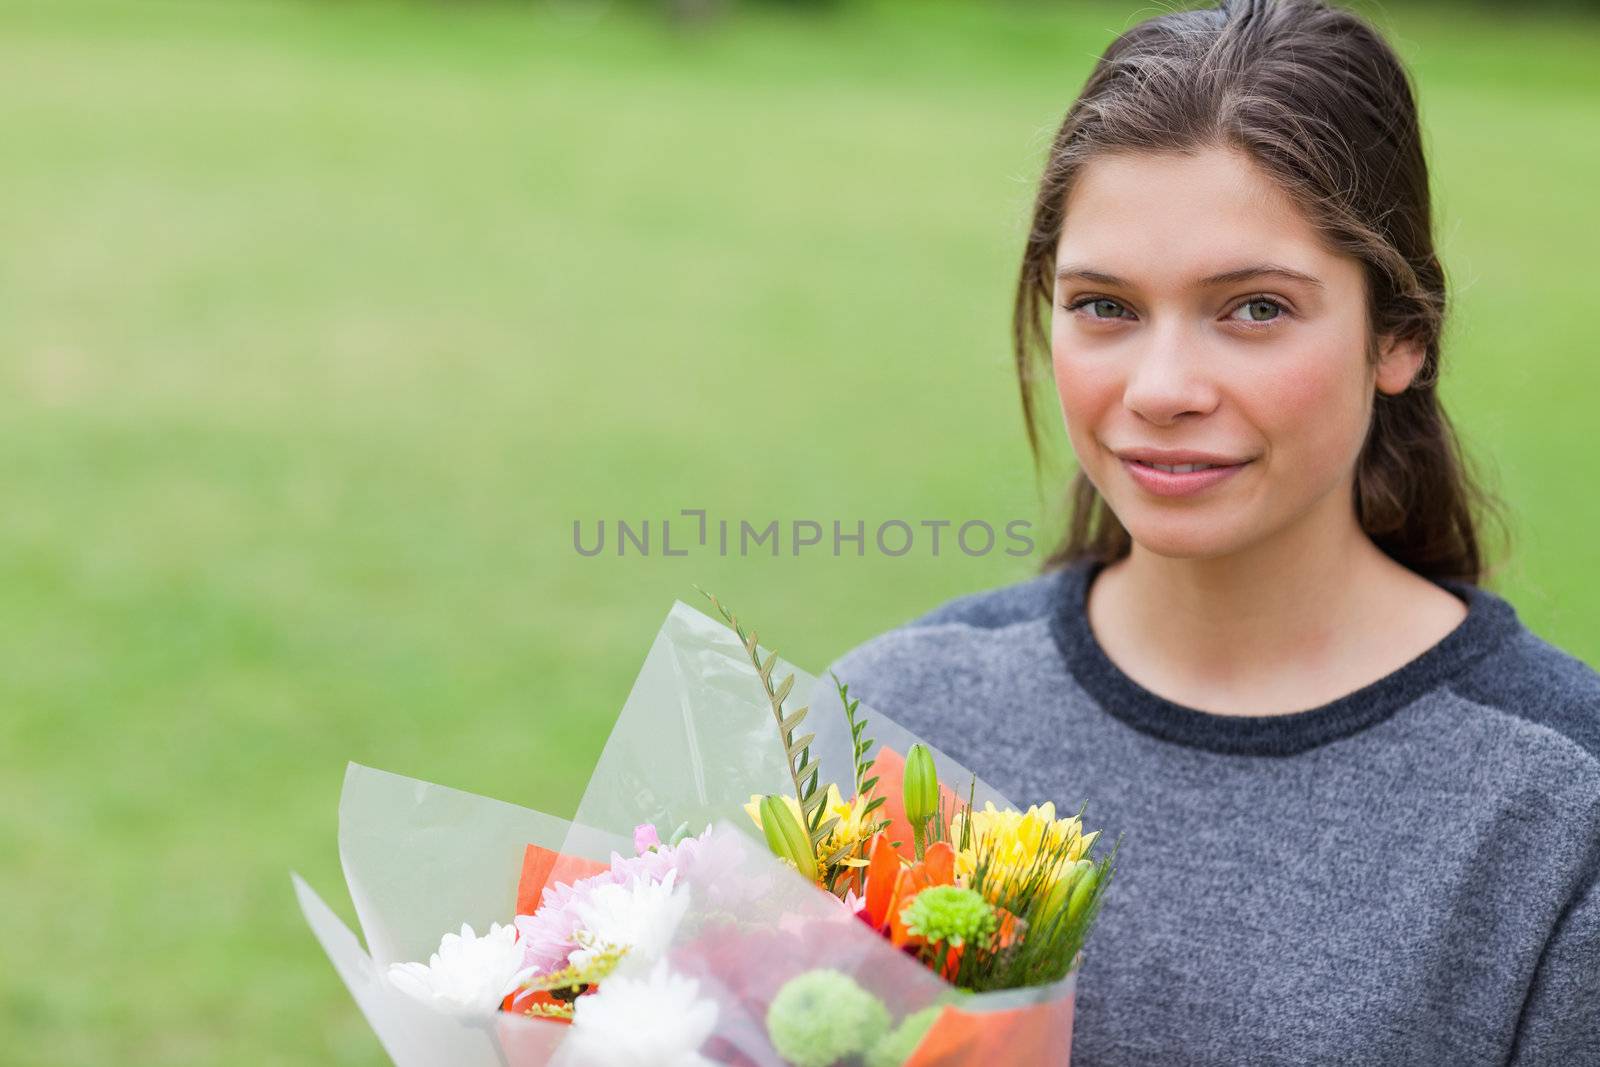 Young calm girl holding a bunch of flowers while standing in a p by Wavebreakmedia